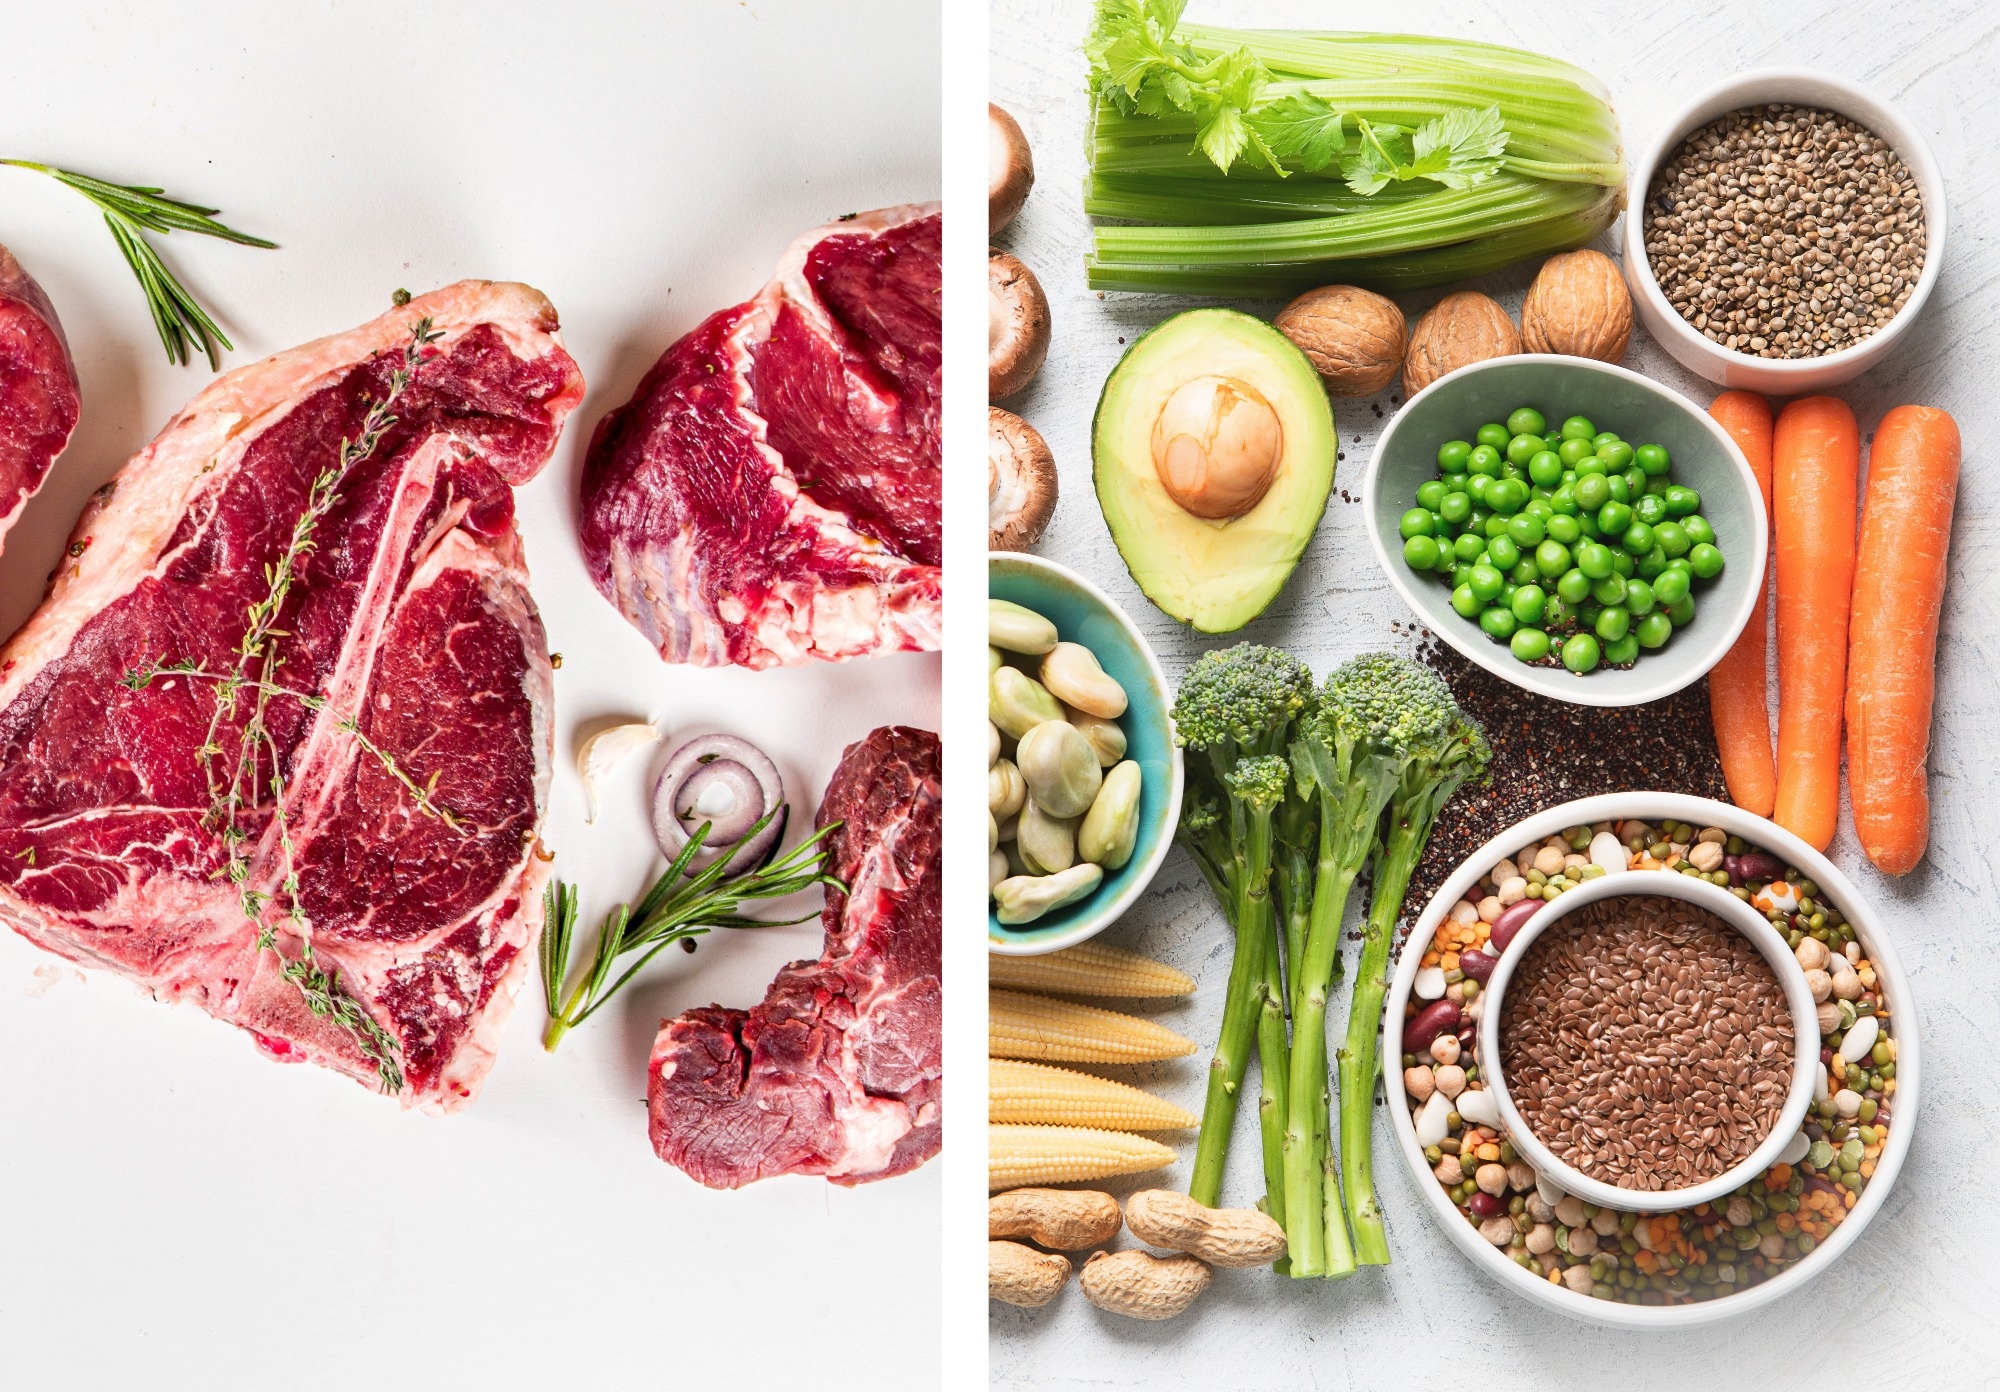 Editorial: Are We What We Eat? The Moral Imperative of the Medical Profession to Promote Plant-Based Nutrition. Image Credit: Rimma Bondarenko and Tatjana Baibakova / Shutterstock